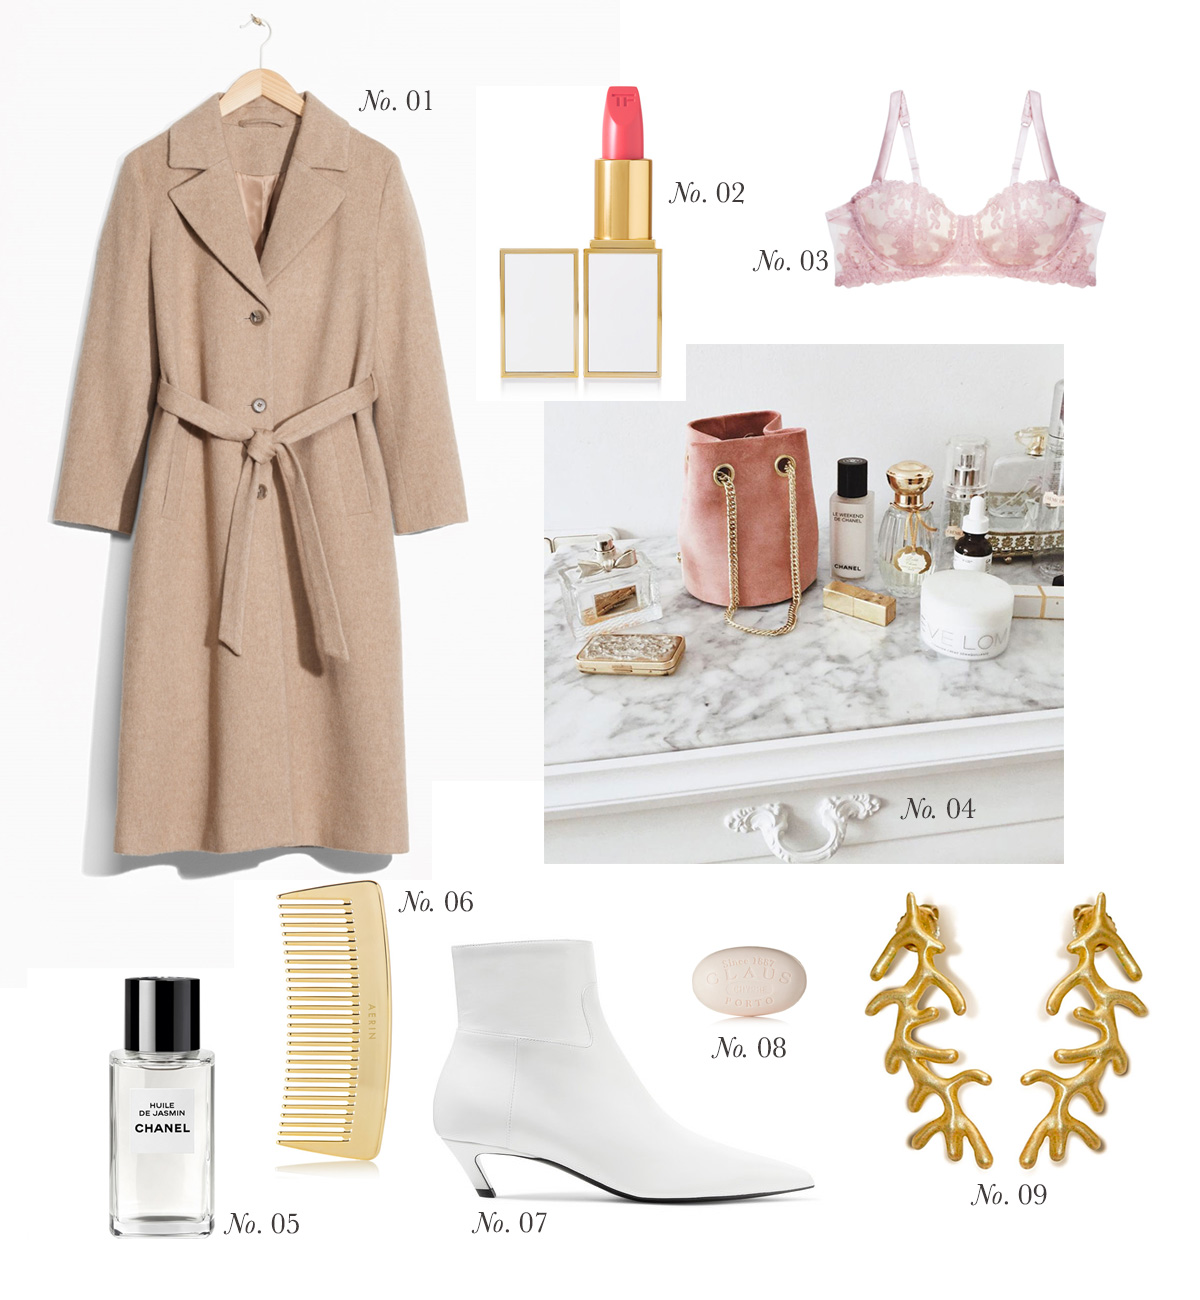 The Edit | Spring Shopping List: A Light Belted Coat, White Ankle Boots, Golden Coral Earrings & more